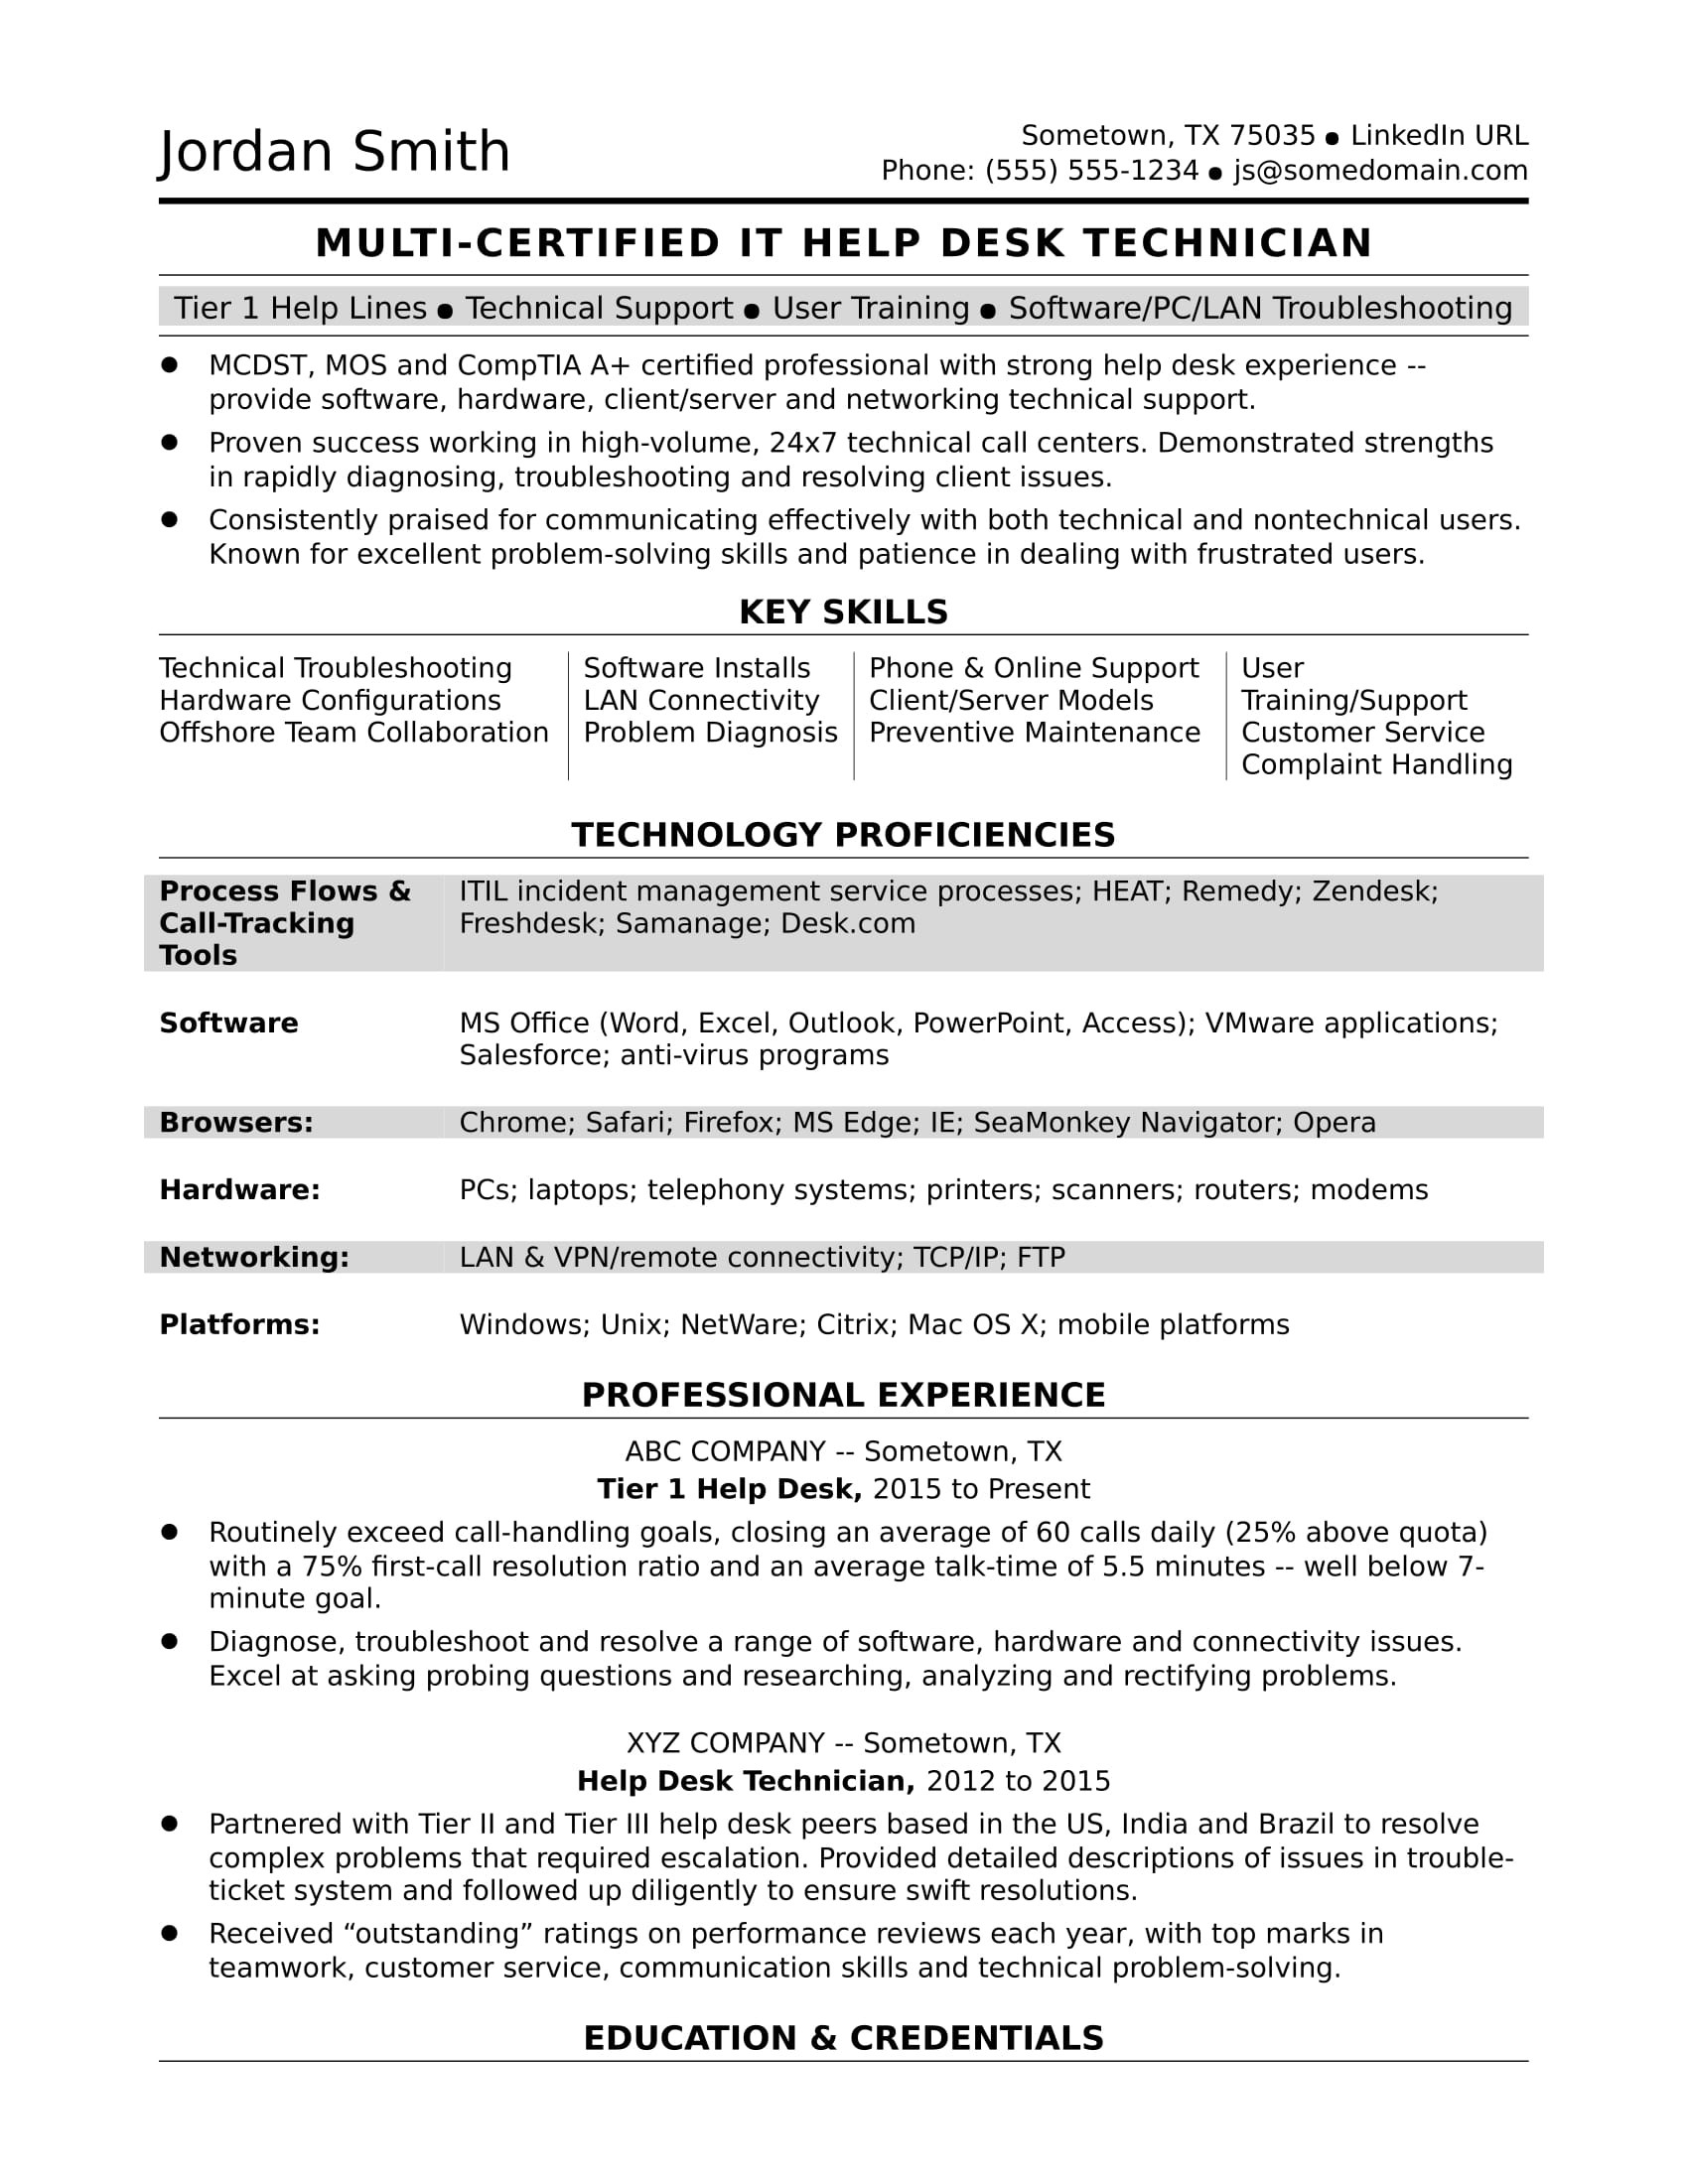 Latest Resume Sample for It Support Specialist Sample Resume for A Midlevel It Help Desk Professional Monster.com